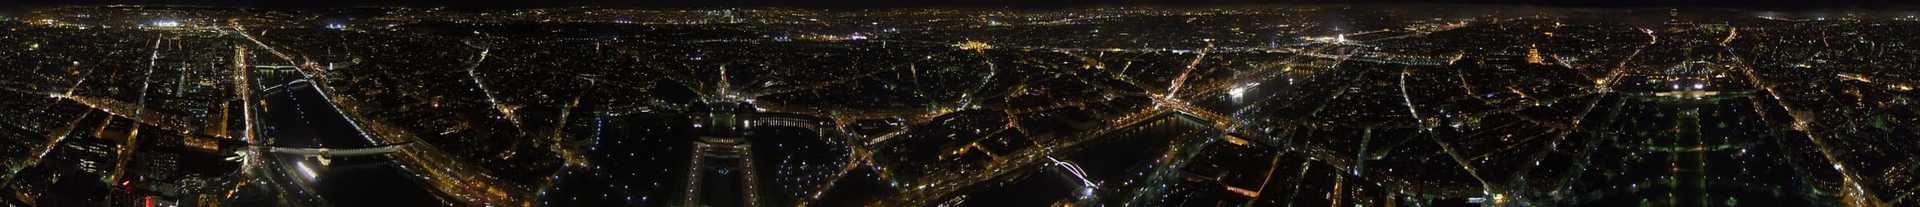 View from the Eifel Tower in Paris